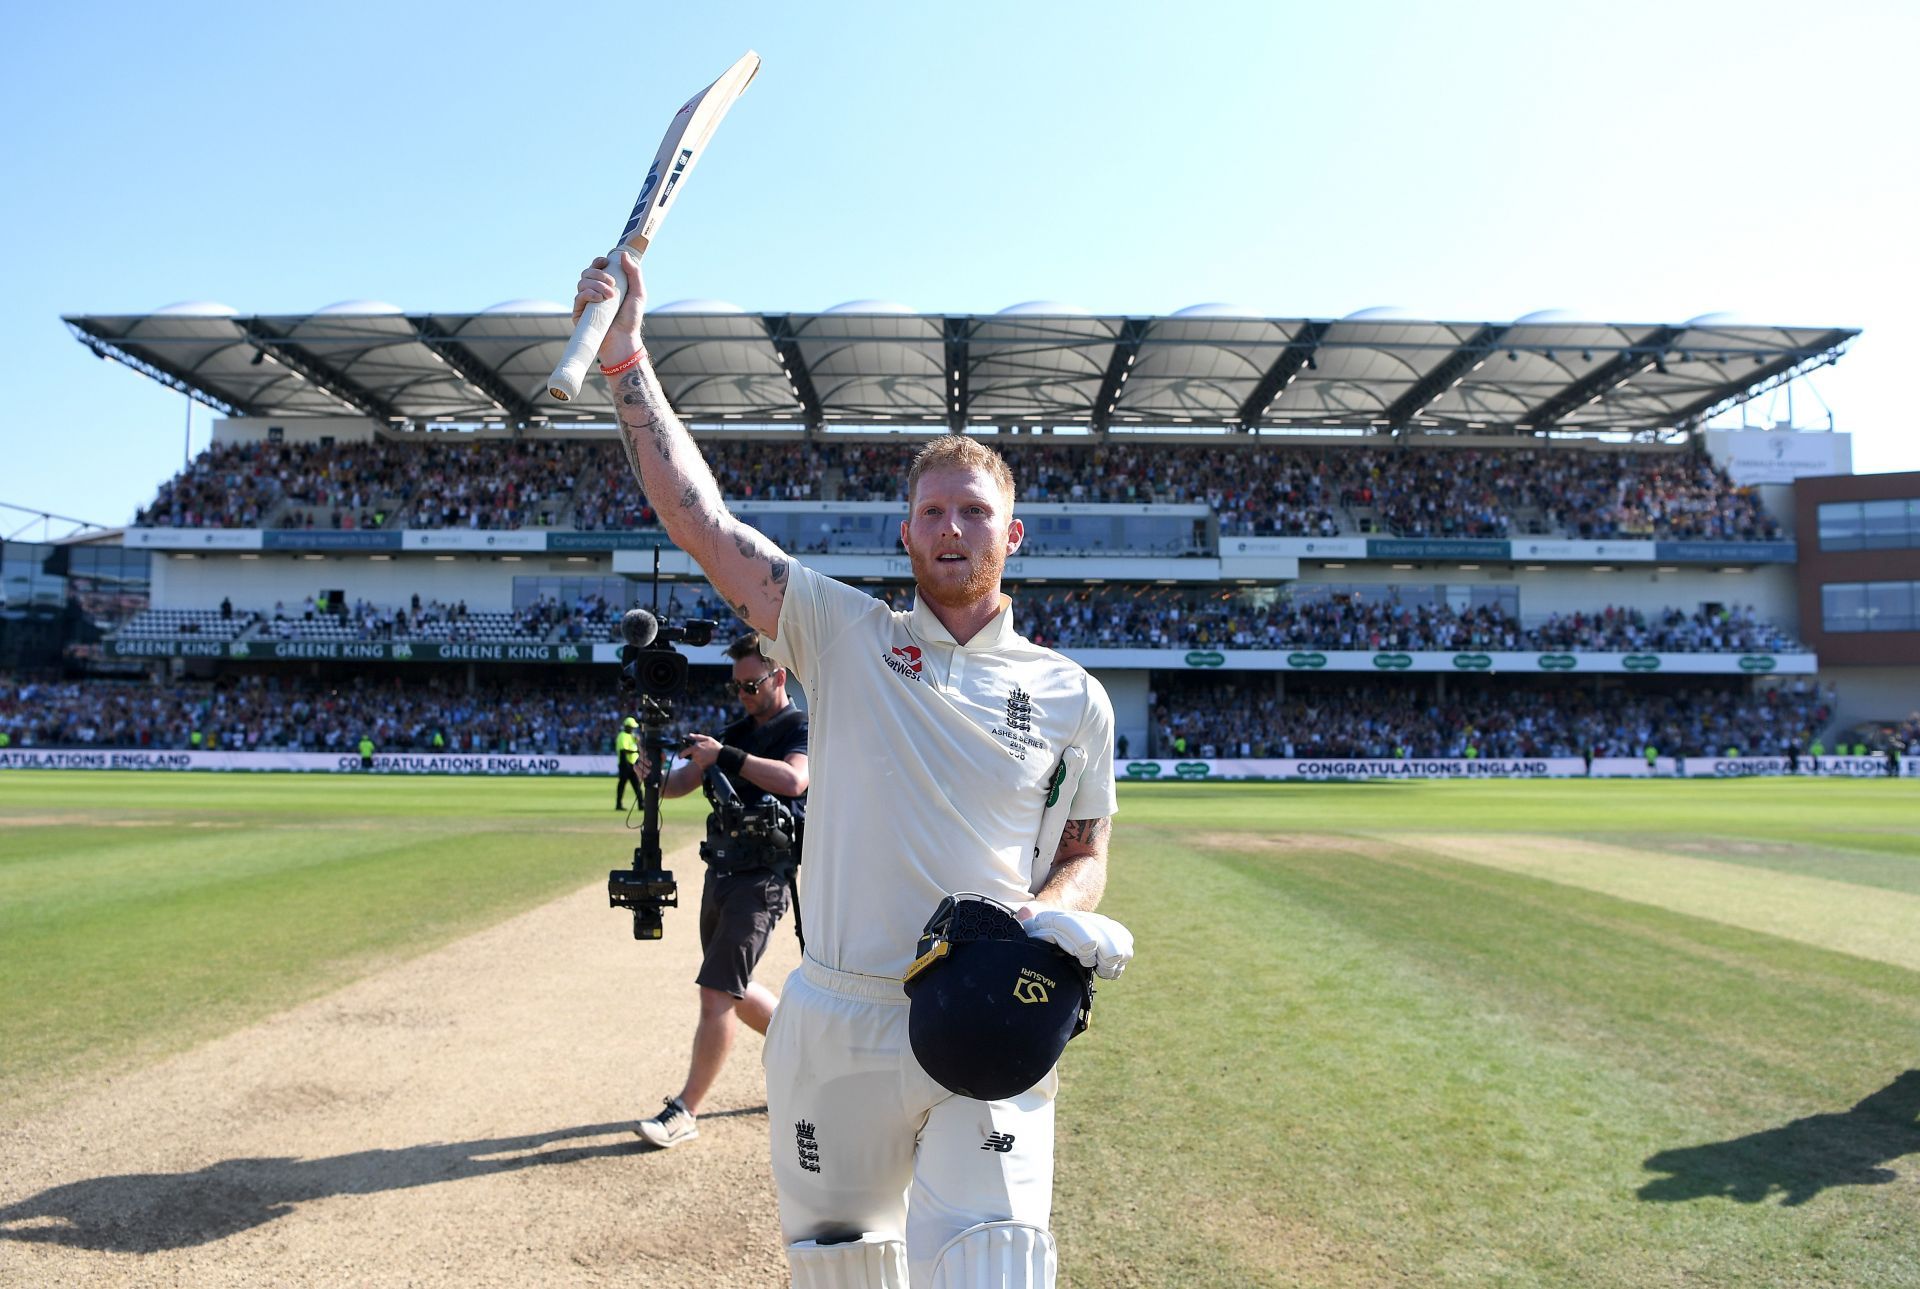 Ben Stokes is one of the most powerful figures in world cricket